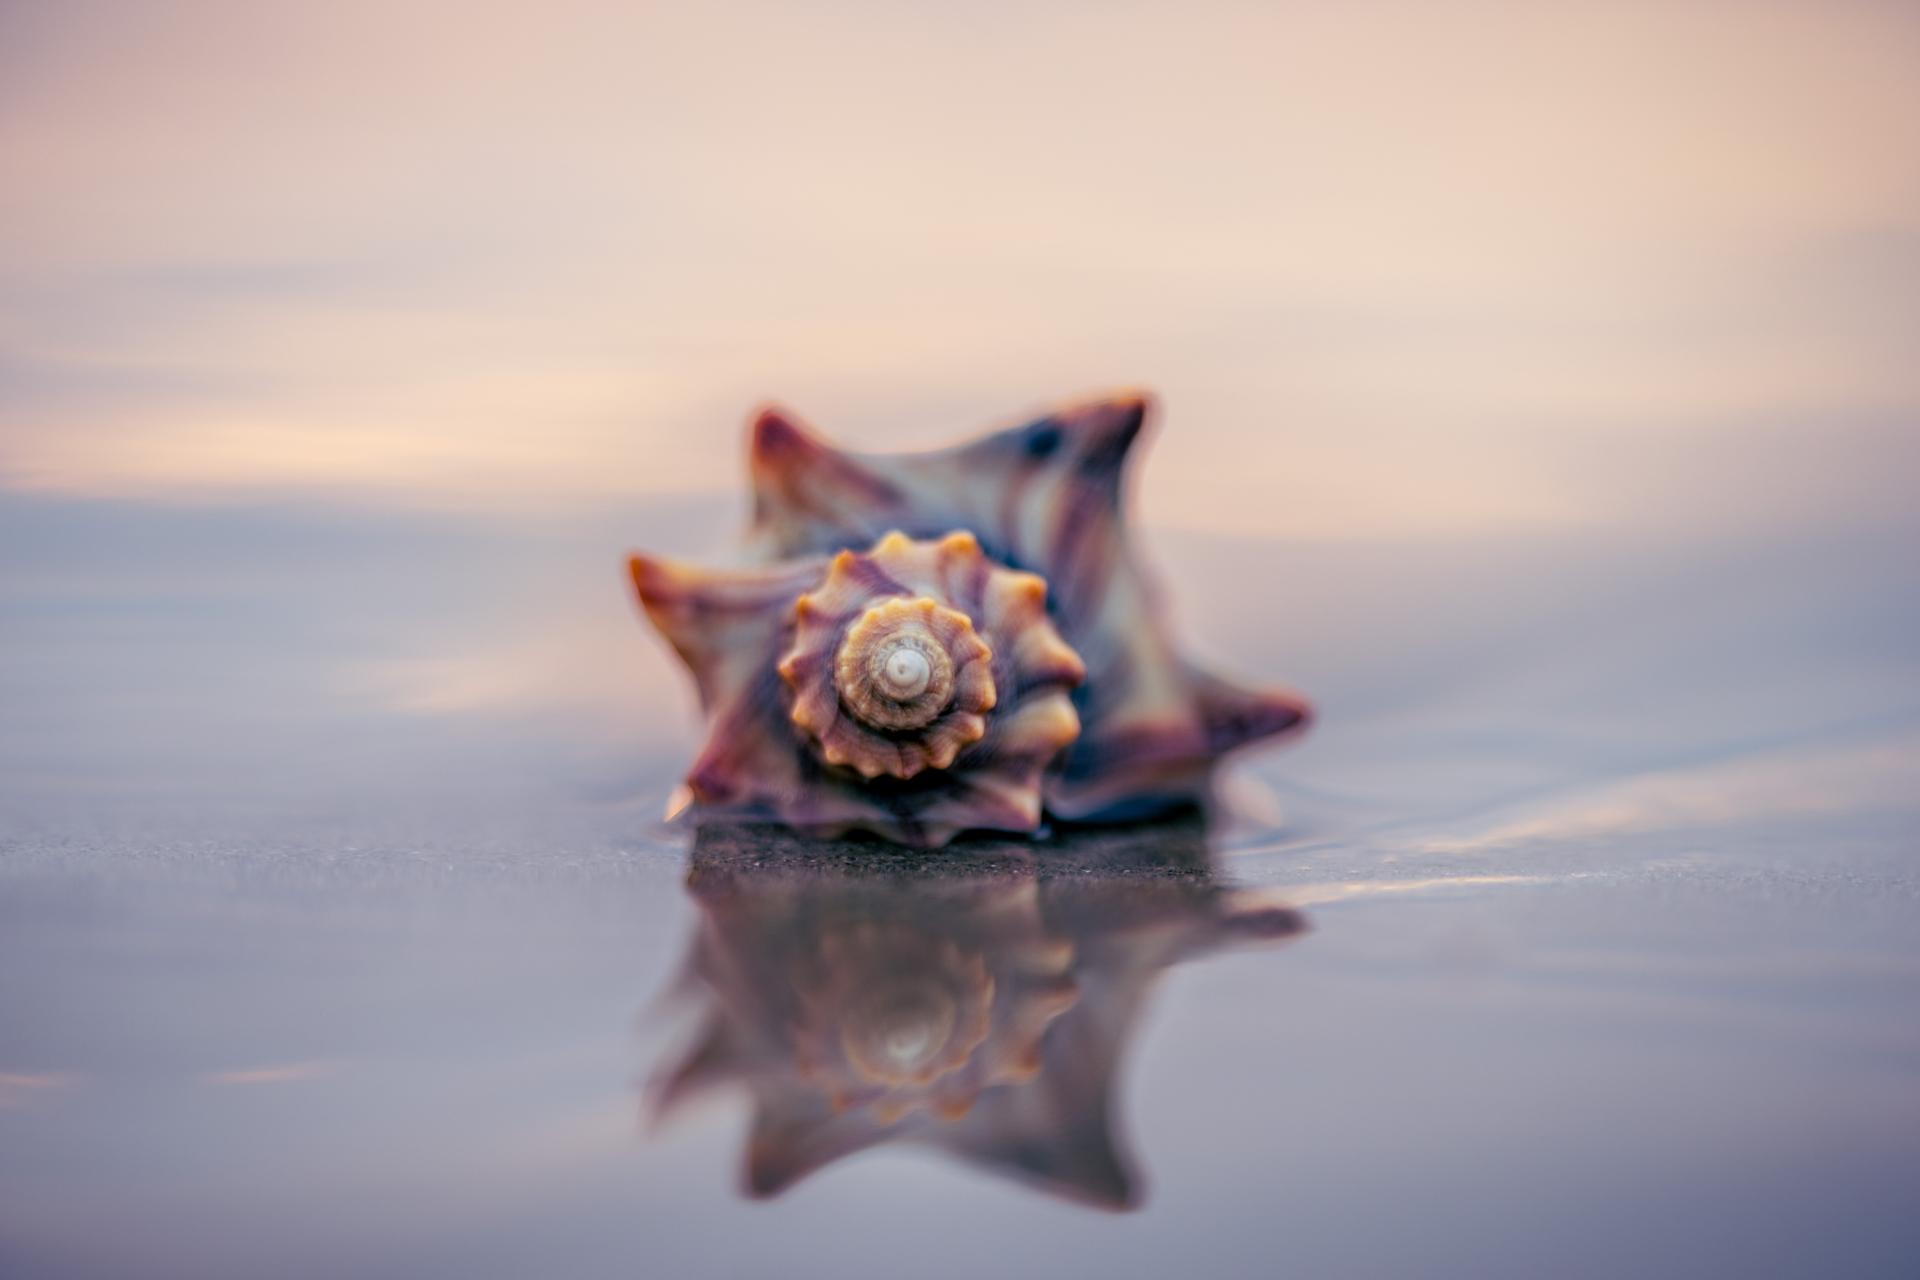 Crown Whelk reflected on the beach